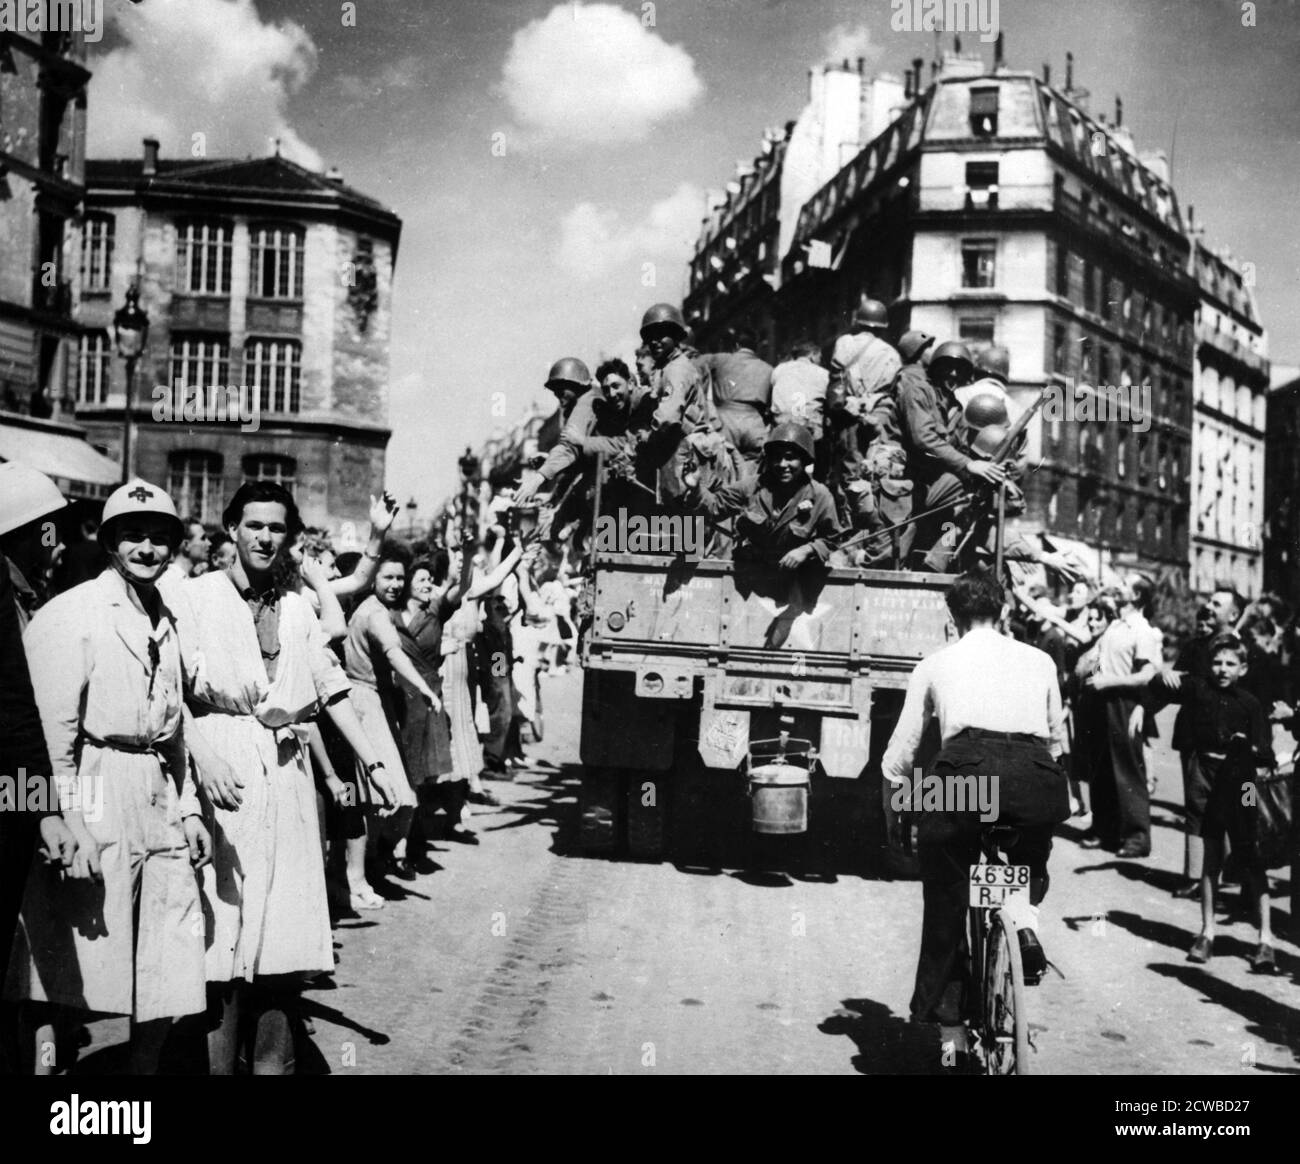 The liberation of Paris, August 1944. Jubilant crowds take to the streets to welcome their Allied liberators. The photographer is unknown. Stock Photo